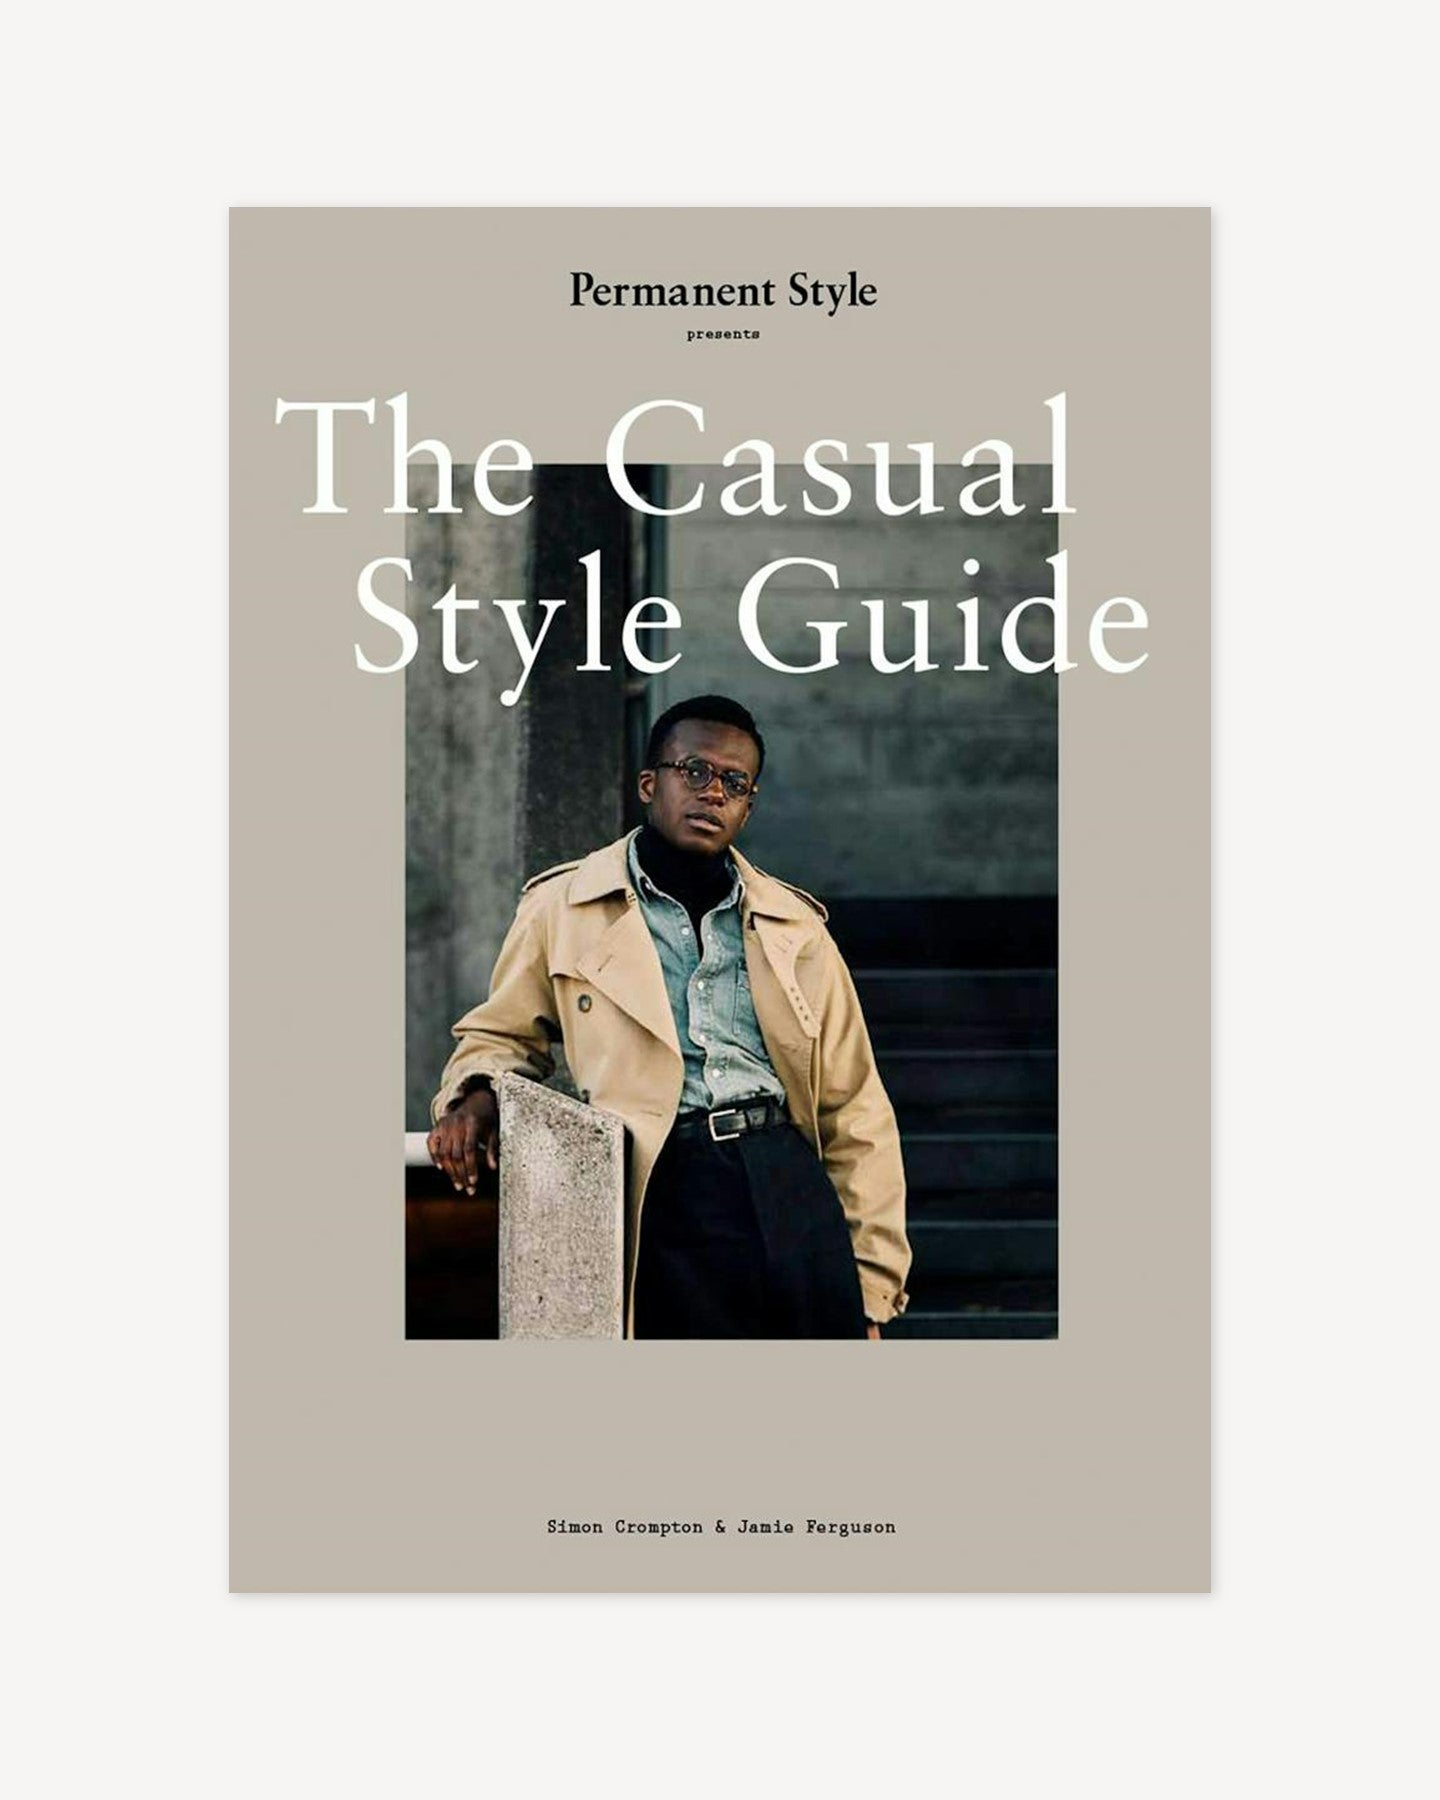 The Casual Style Guide by Permanent Style